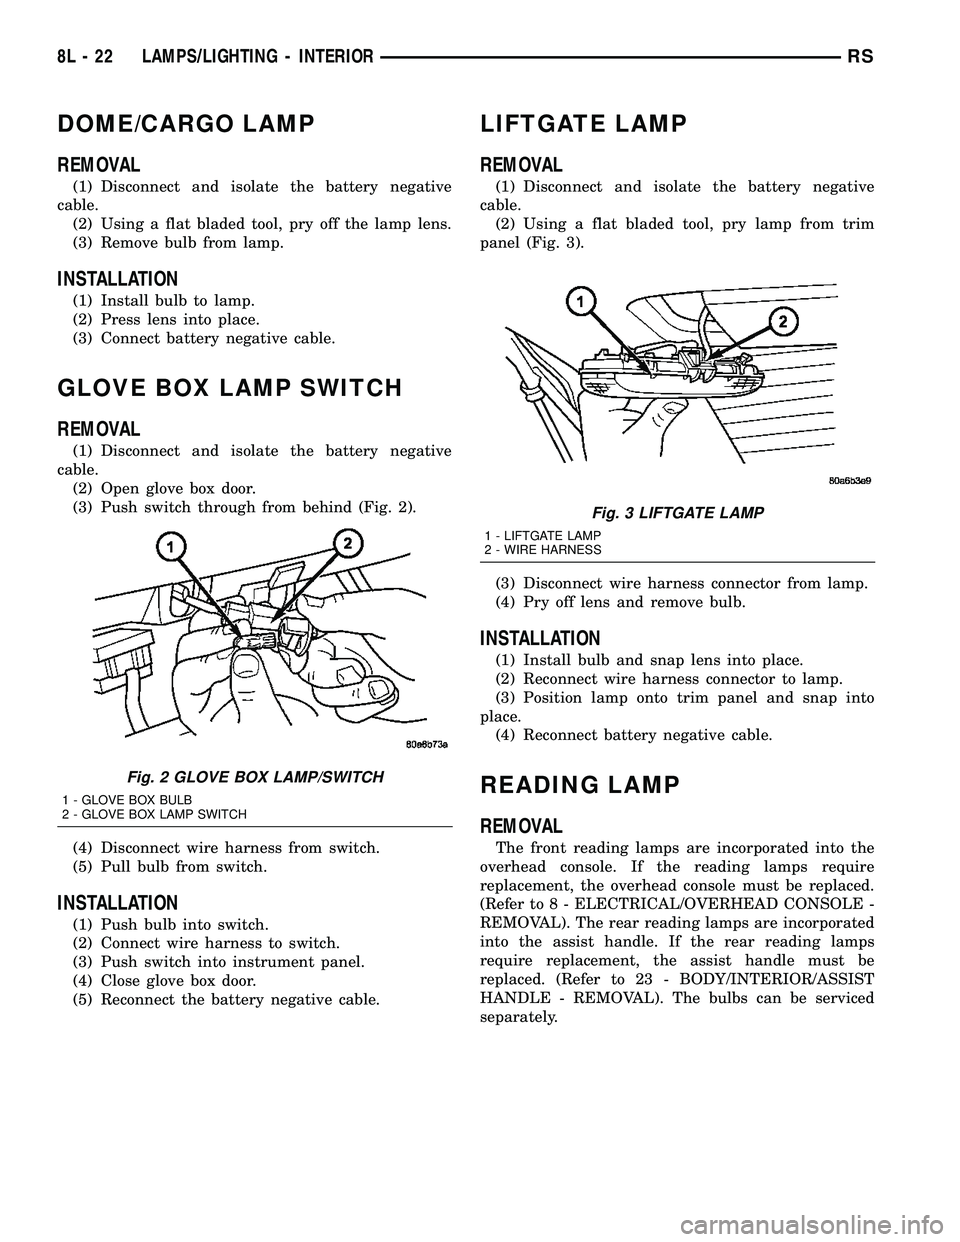 CHRYSLER VOYAGER 2005  Service Manual DOME/CARGO LAMP
REMOVAL
(1) Disconnect and isolate the battery negative
cable.
(2) Using a flat bladed tool, pry off the lamp lens.
(3) Remove bulb from lamp.
INSTALLATION
(1) Install bulb to lamp.
(2